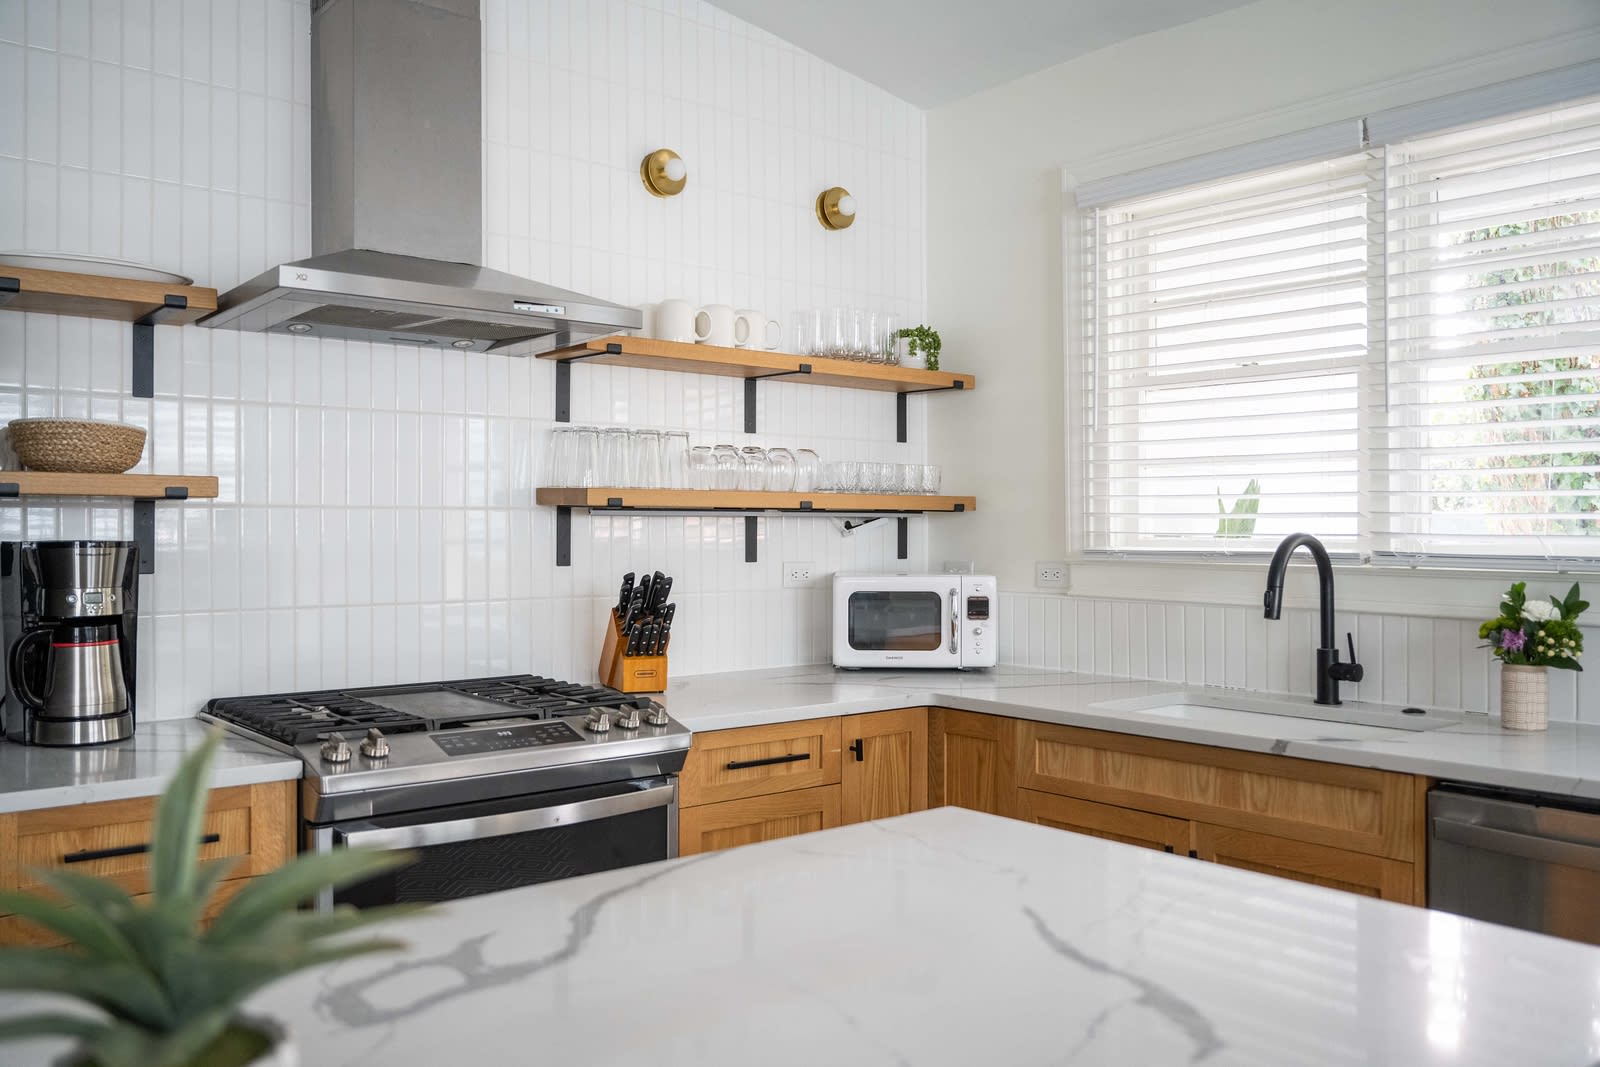 Fully equipped kitchen with everything you need to cook a meal!